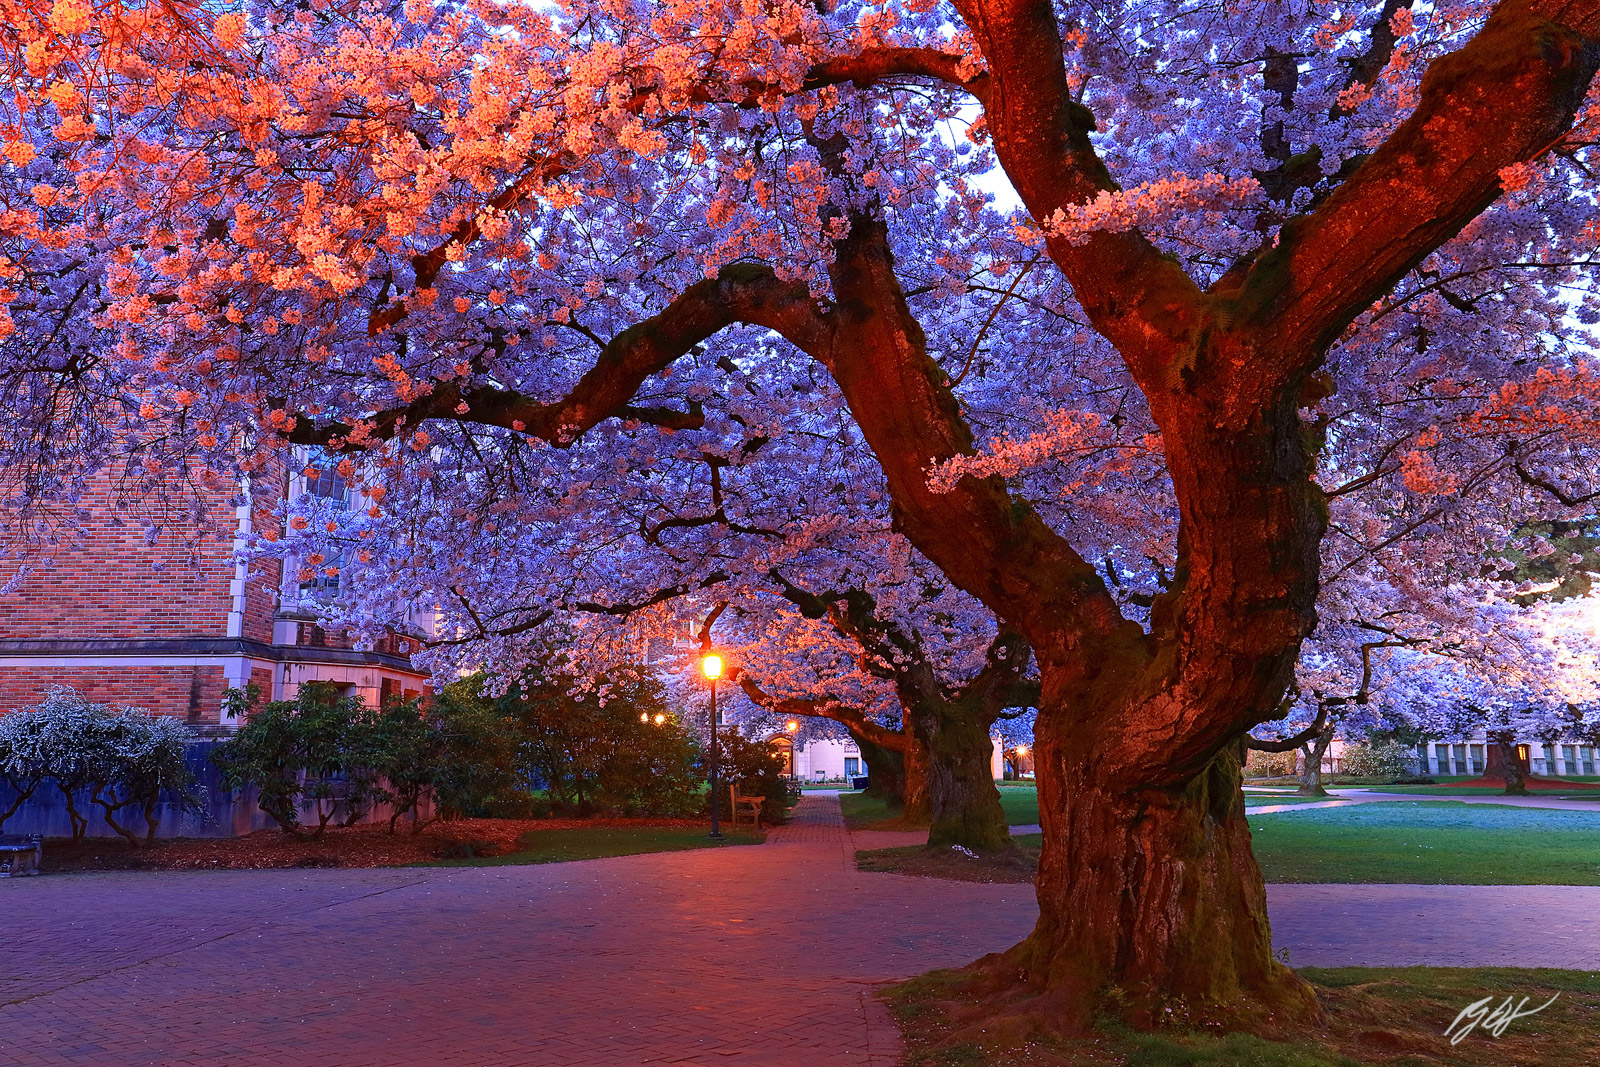 Cherry trees in Bloom in the University of Washington Quad in Seattle Washington